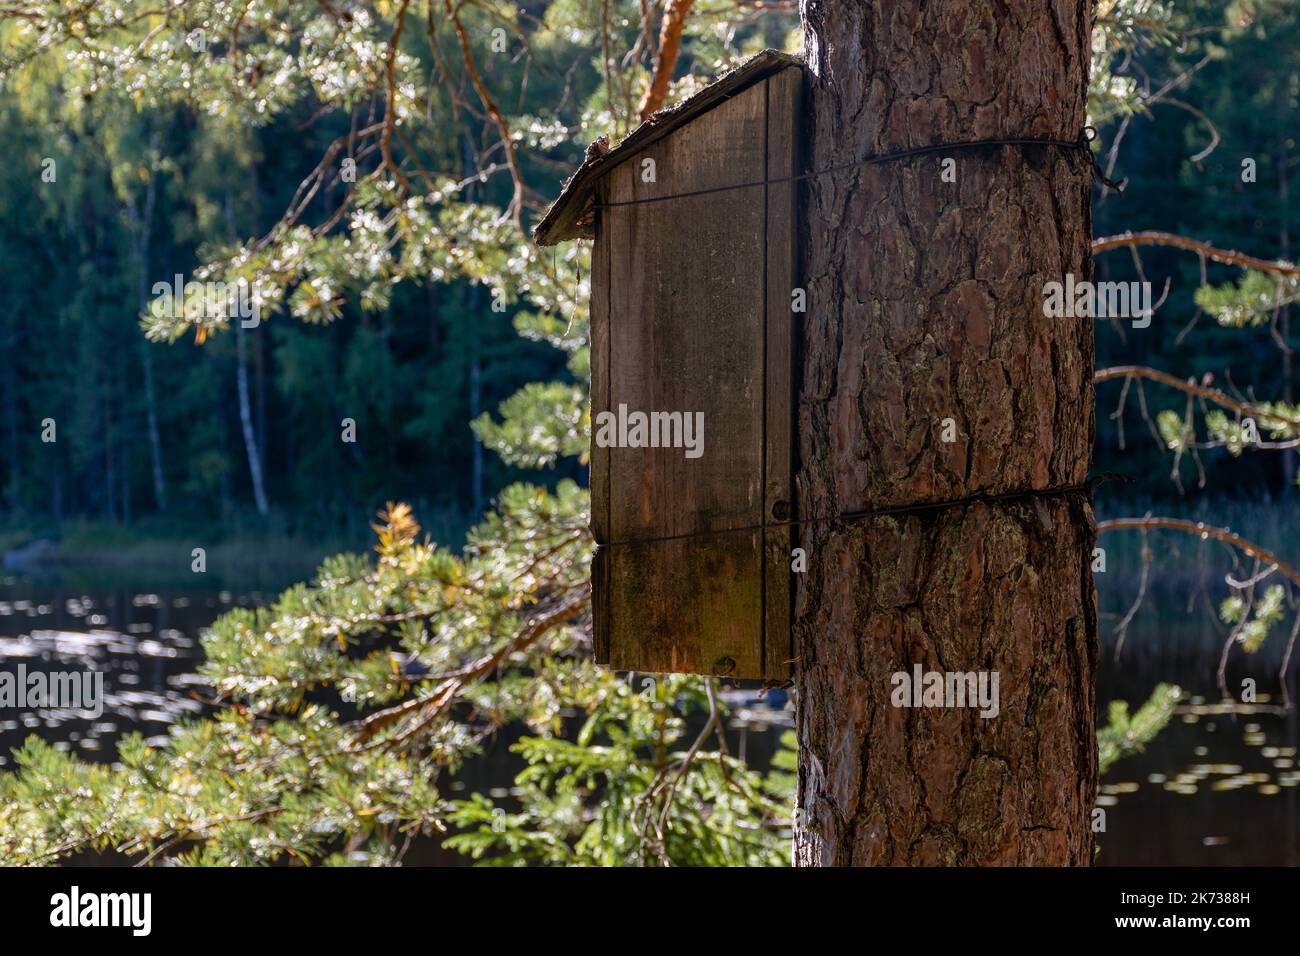 Wooden birdhouse tied to a tree with a forest pond in the background Stock Photo